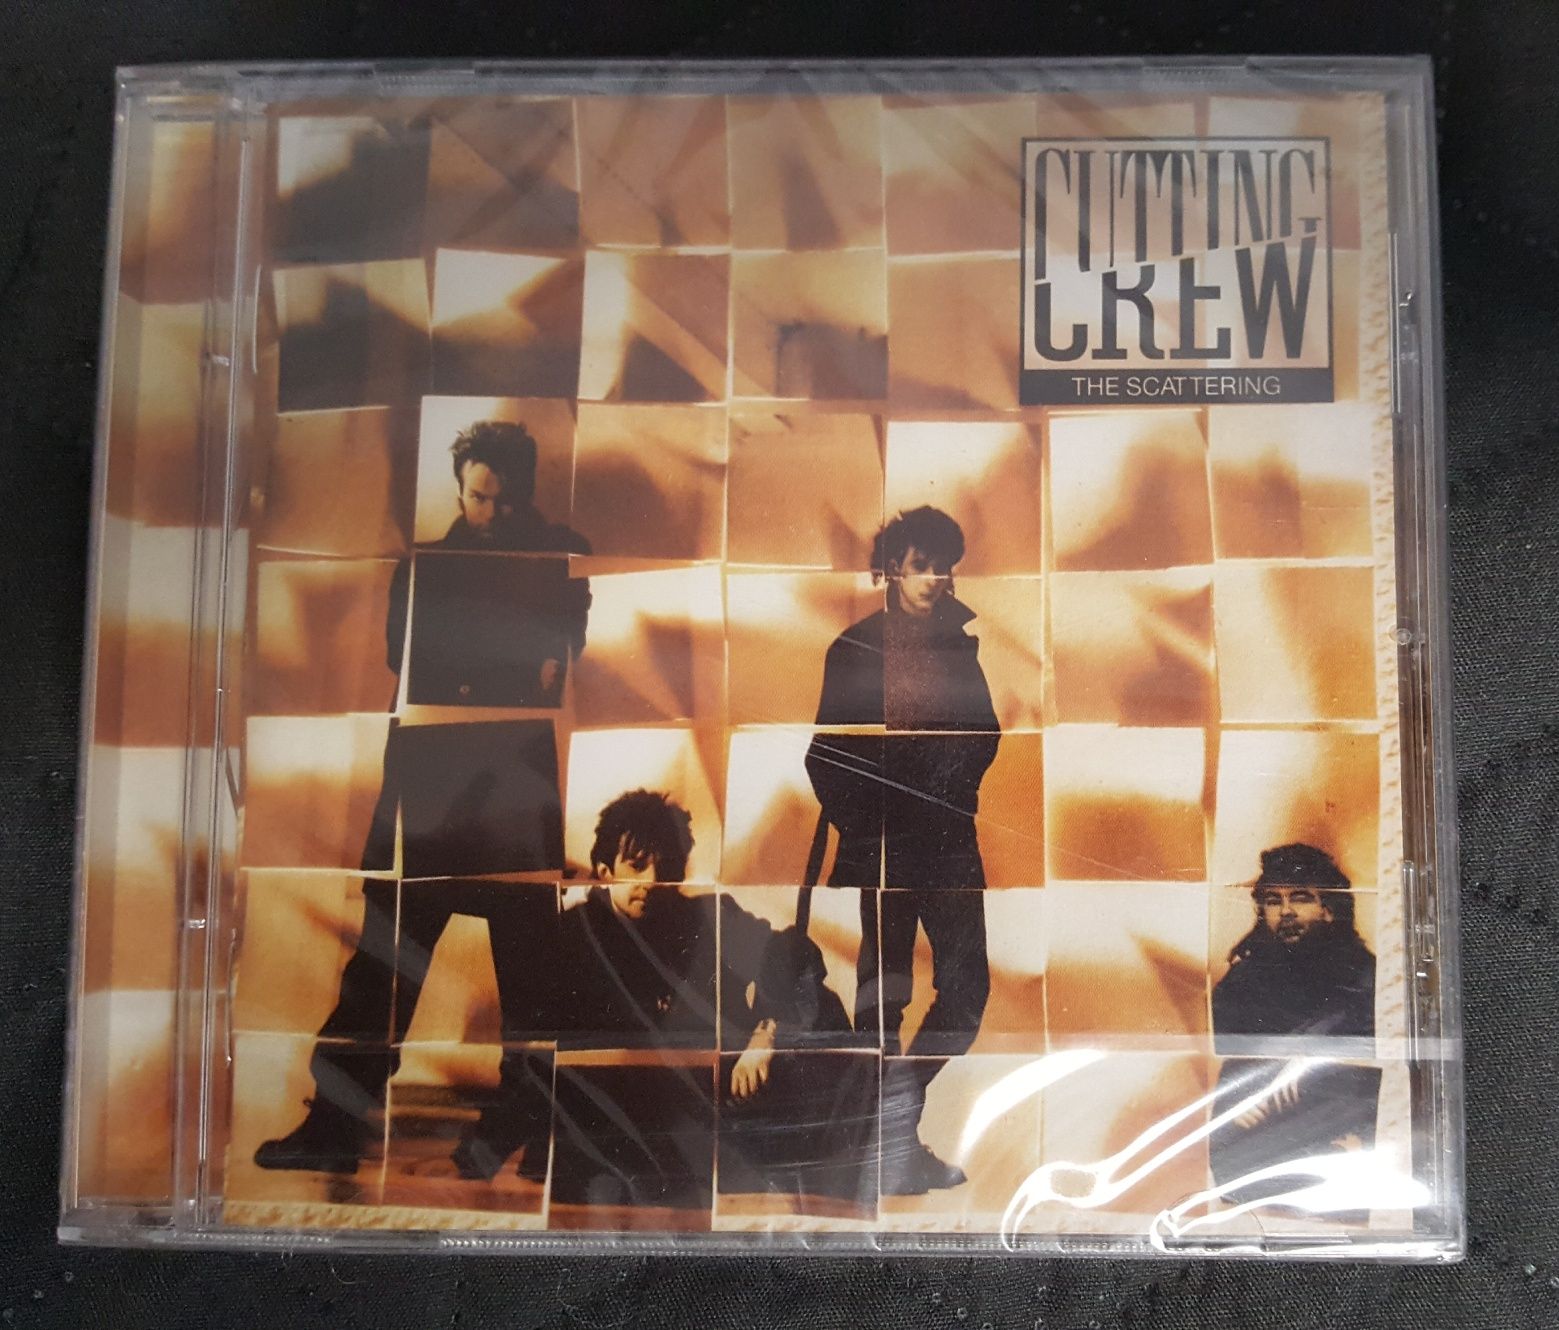 Cutting Crew The Scattering CD